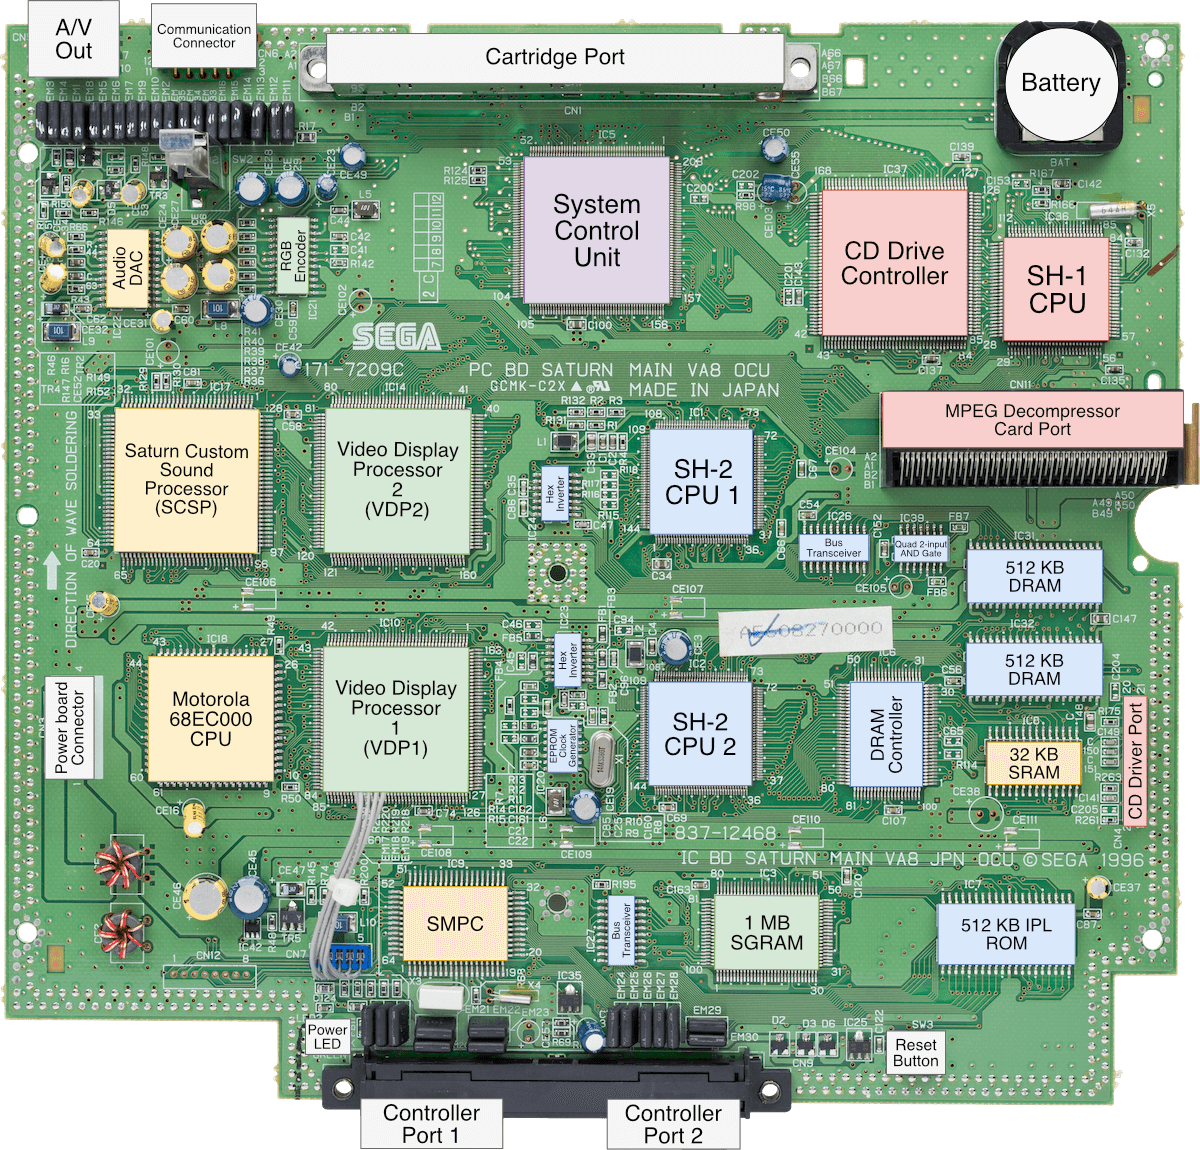 motherboard_marked.cbd80653580e92502199876a19647a2c8a010528aa42739c3b1d508ee303dae8.png